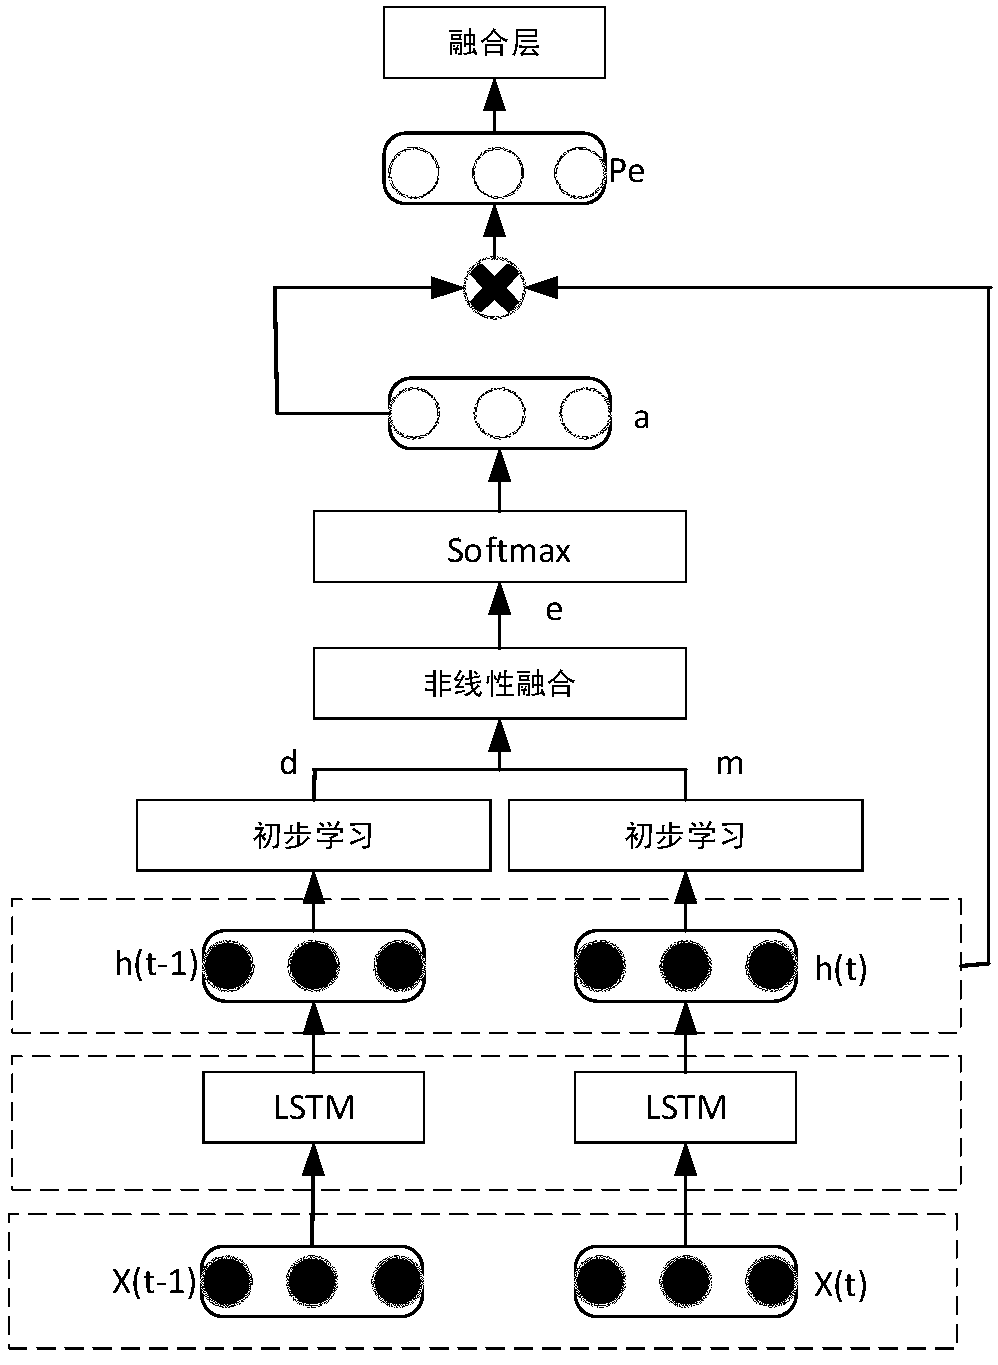 Multi-feature-fusion Chines-text classification method based on Attention neural network